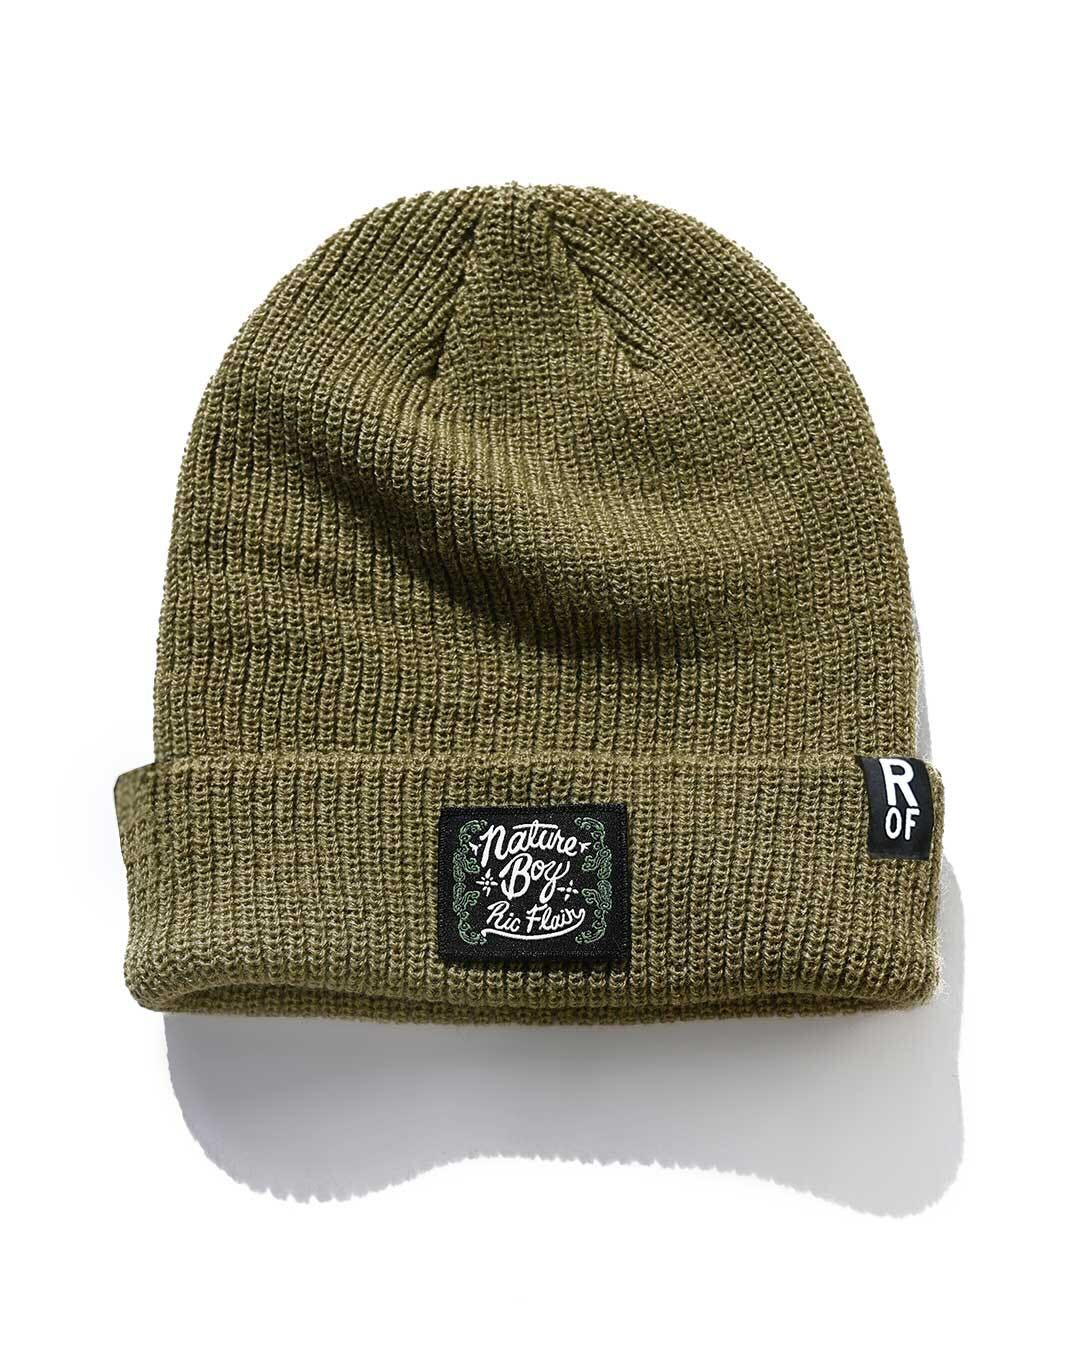 Ric Flair Nature Boy Olive Beanie - Roots of Fight